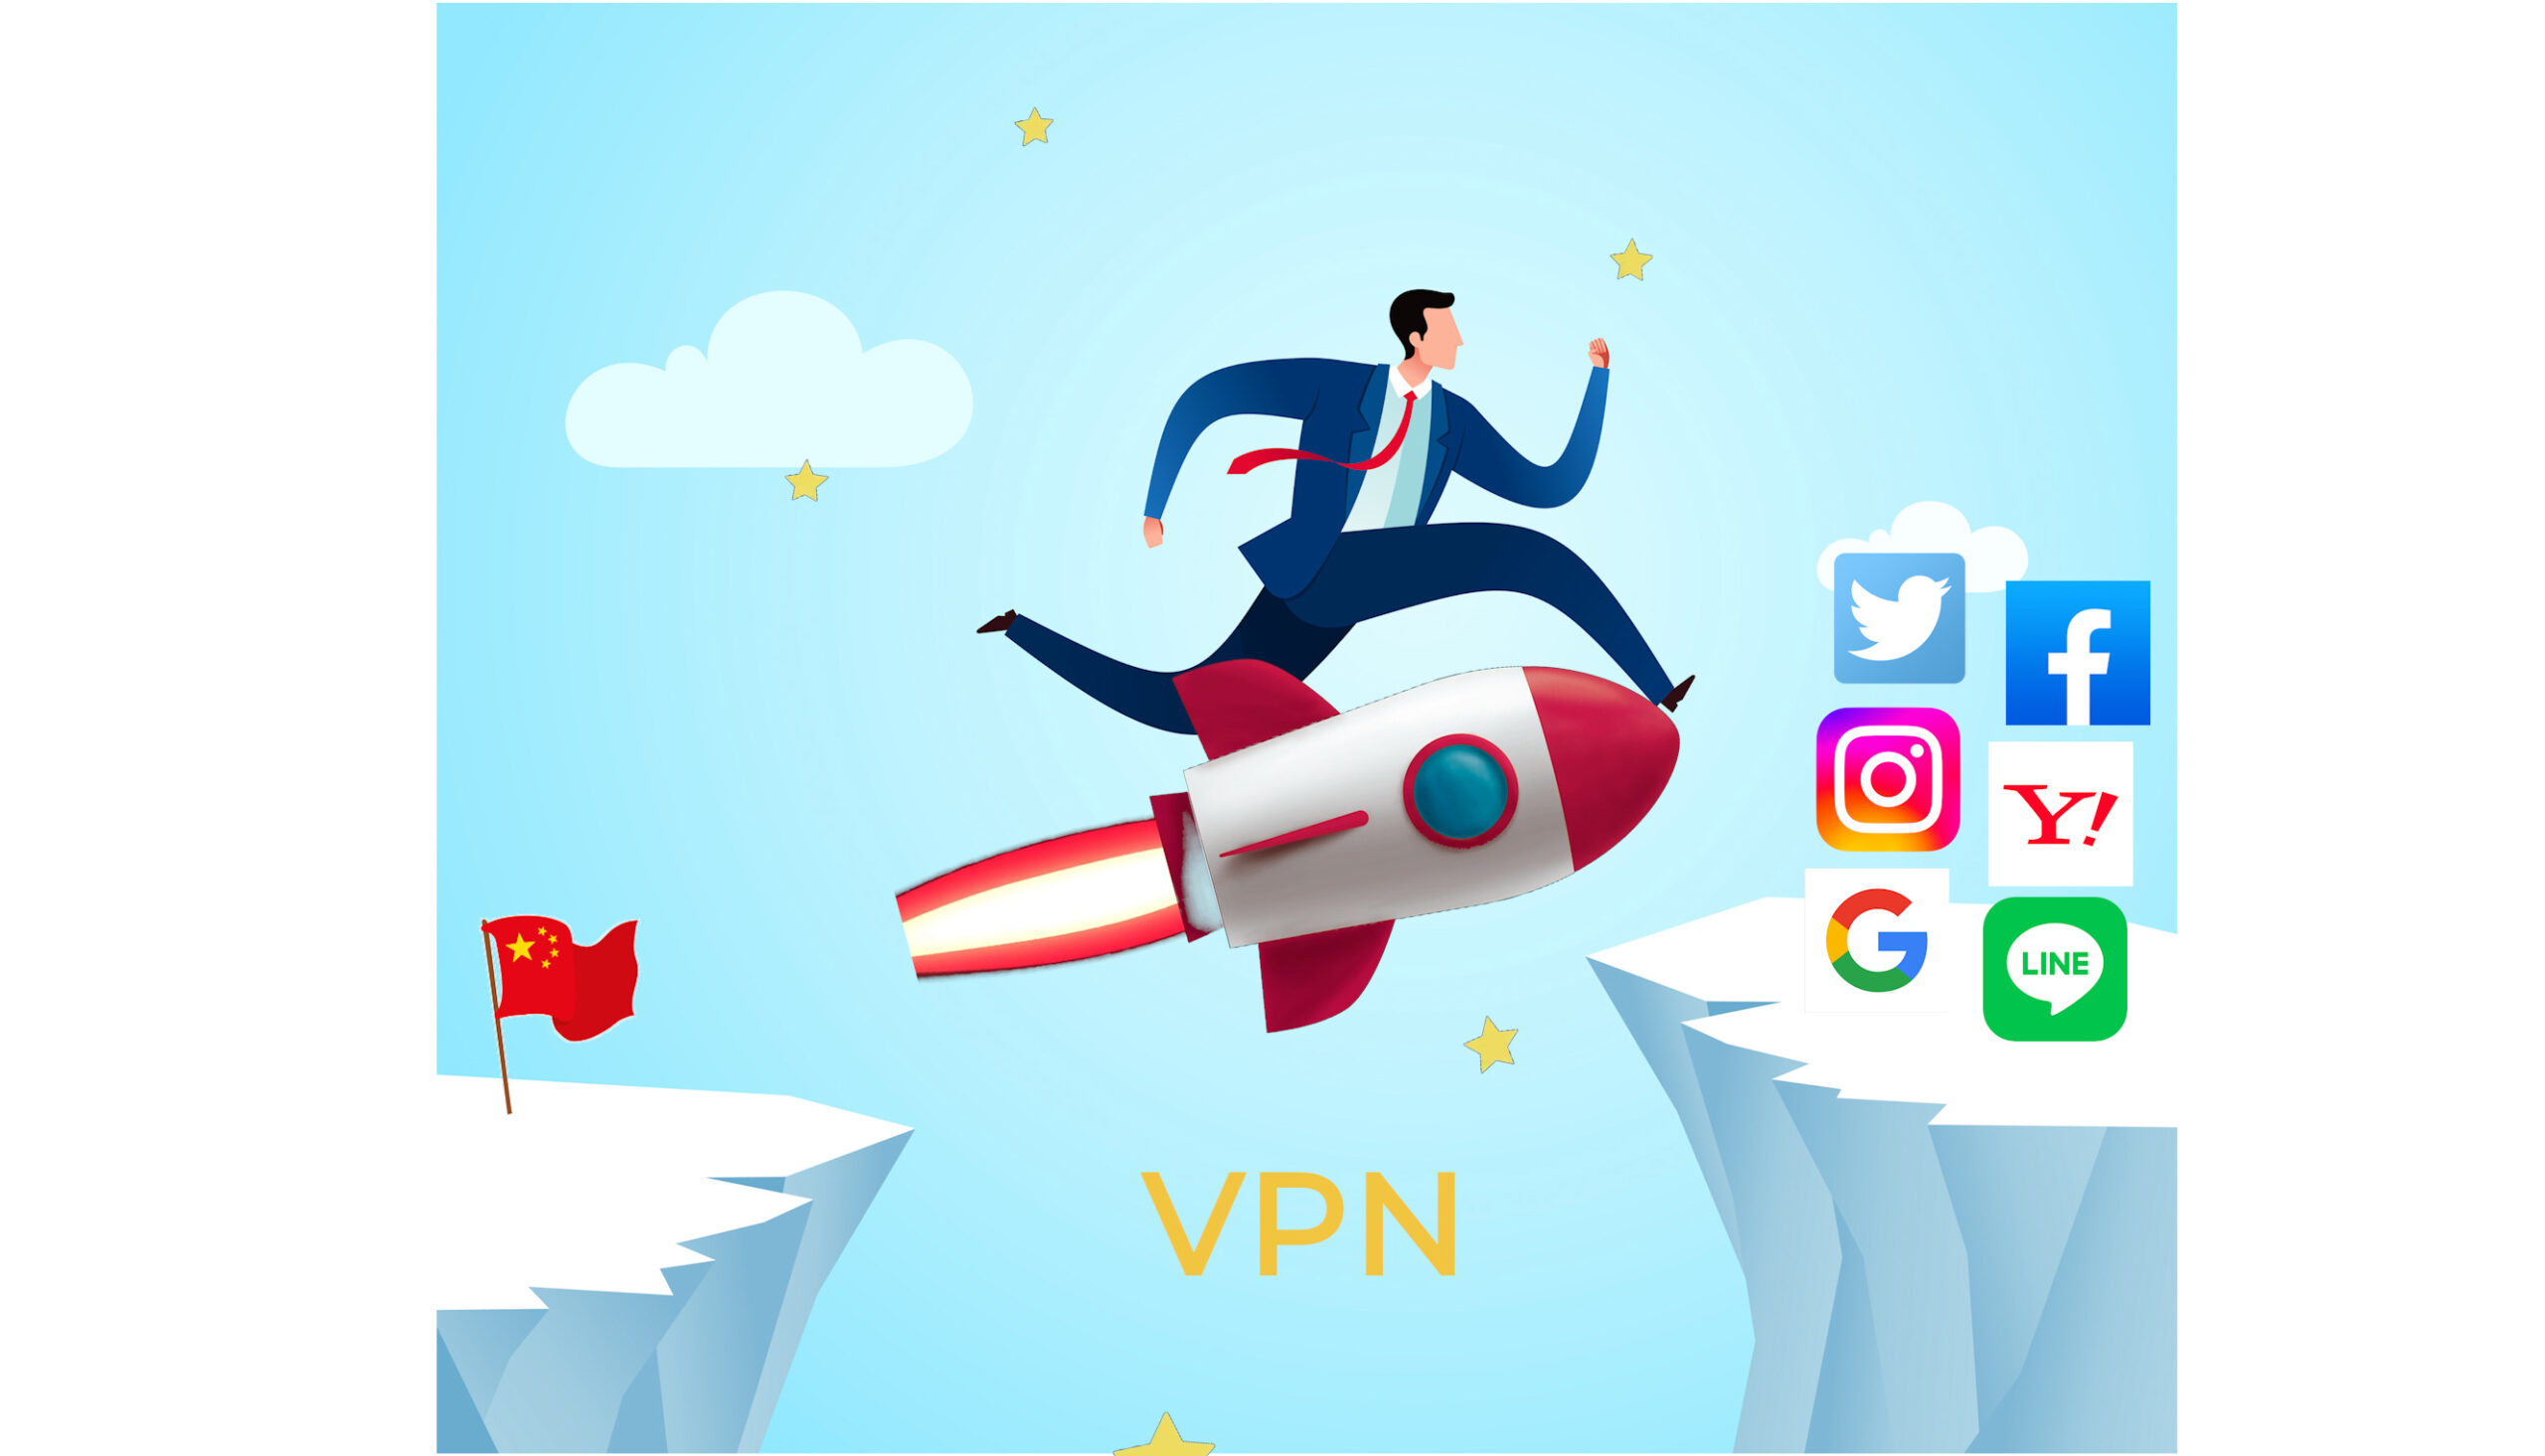 Using VPN allows people to access websites and apps which can't be used in China